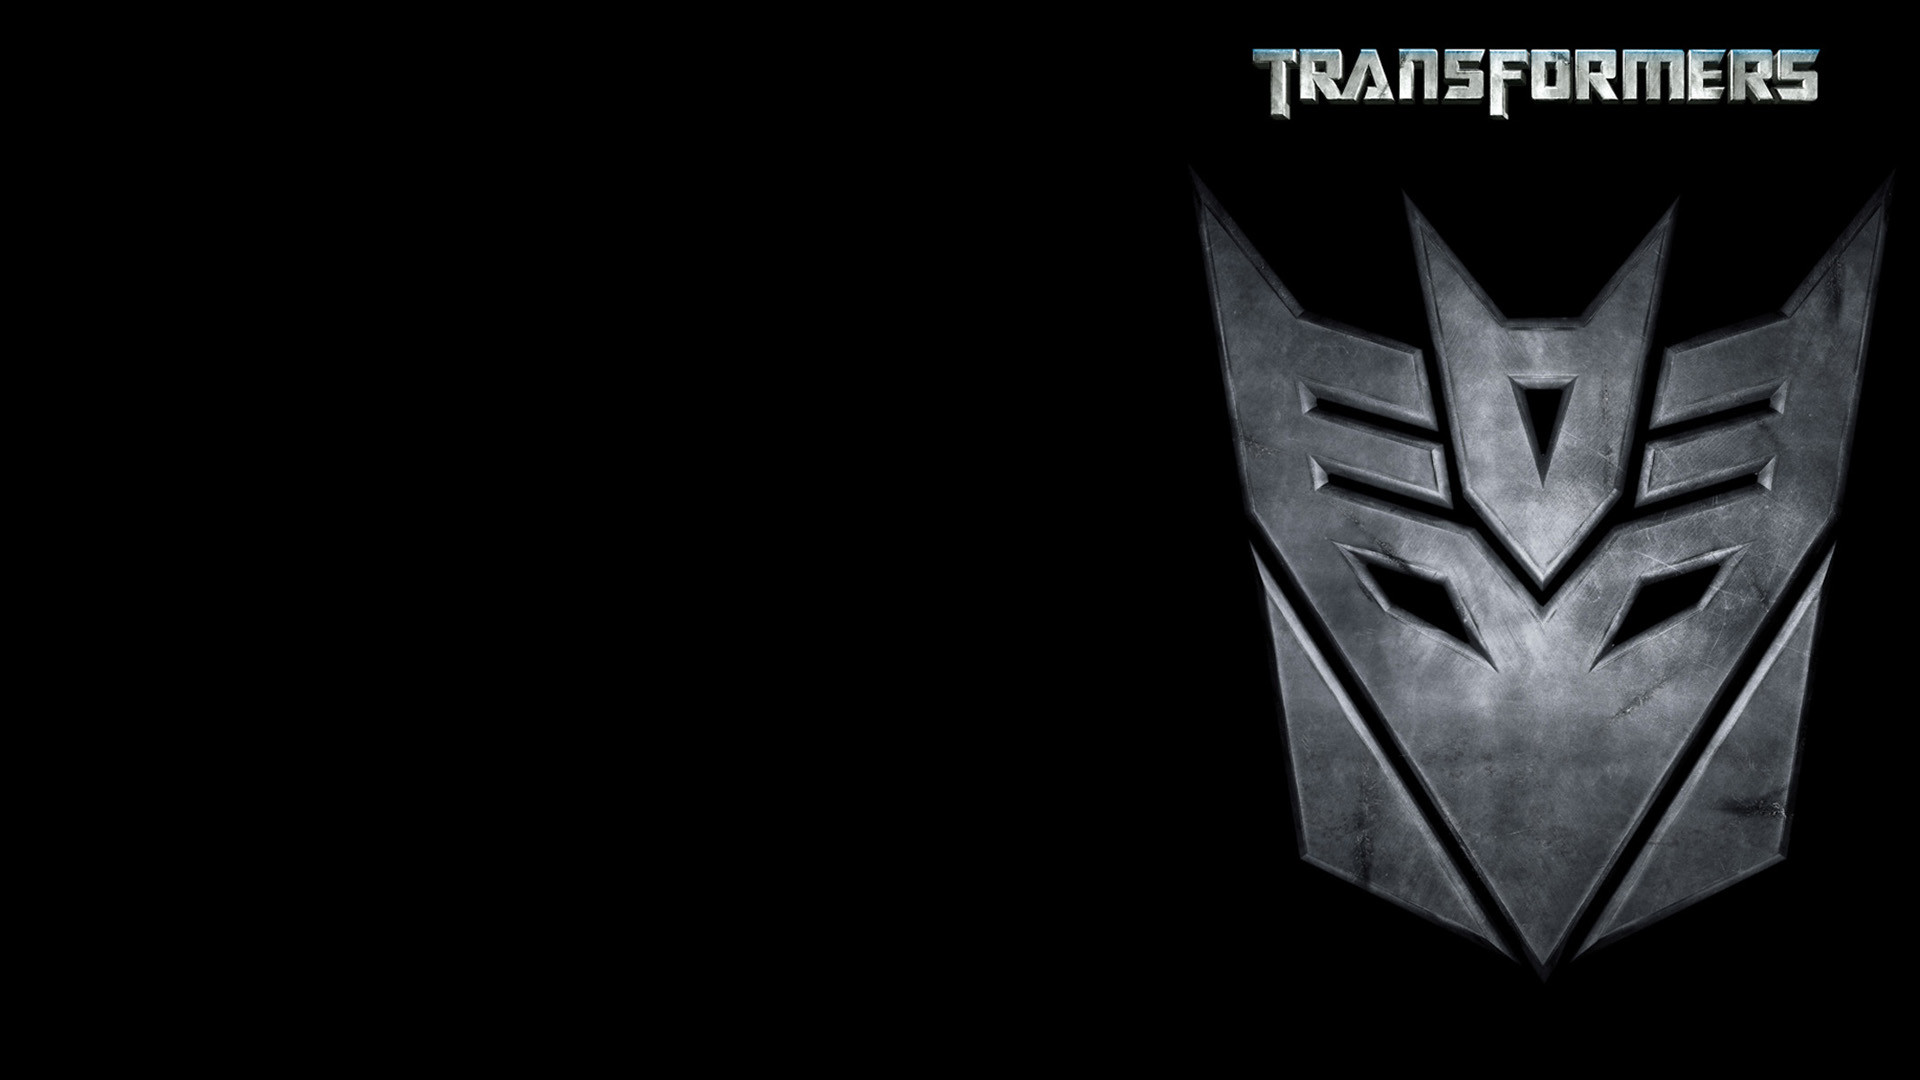 Published February 21, 2010 at 1920 1080 in Transformers Wallpaper